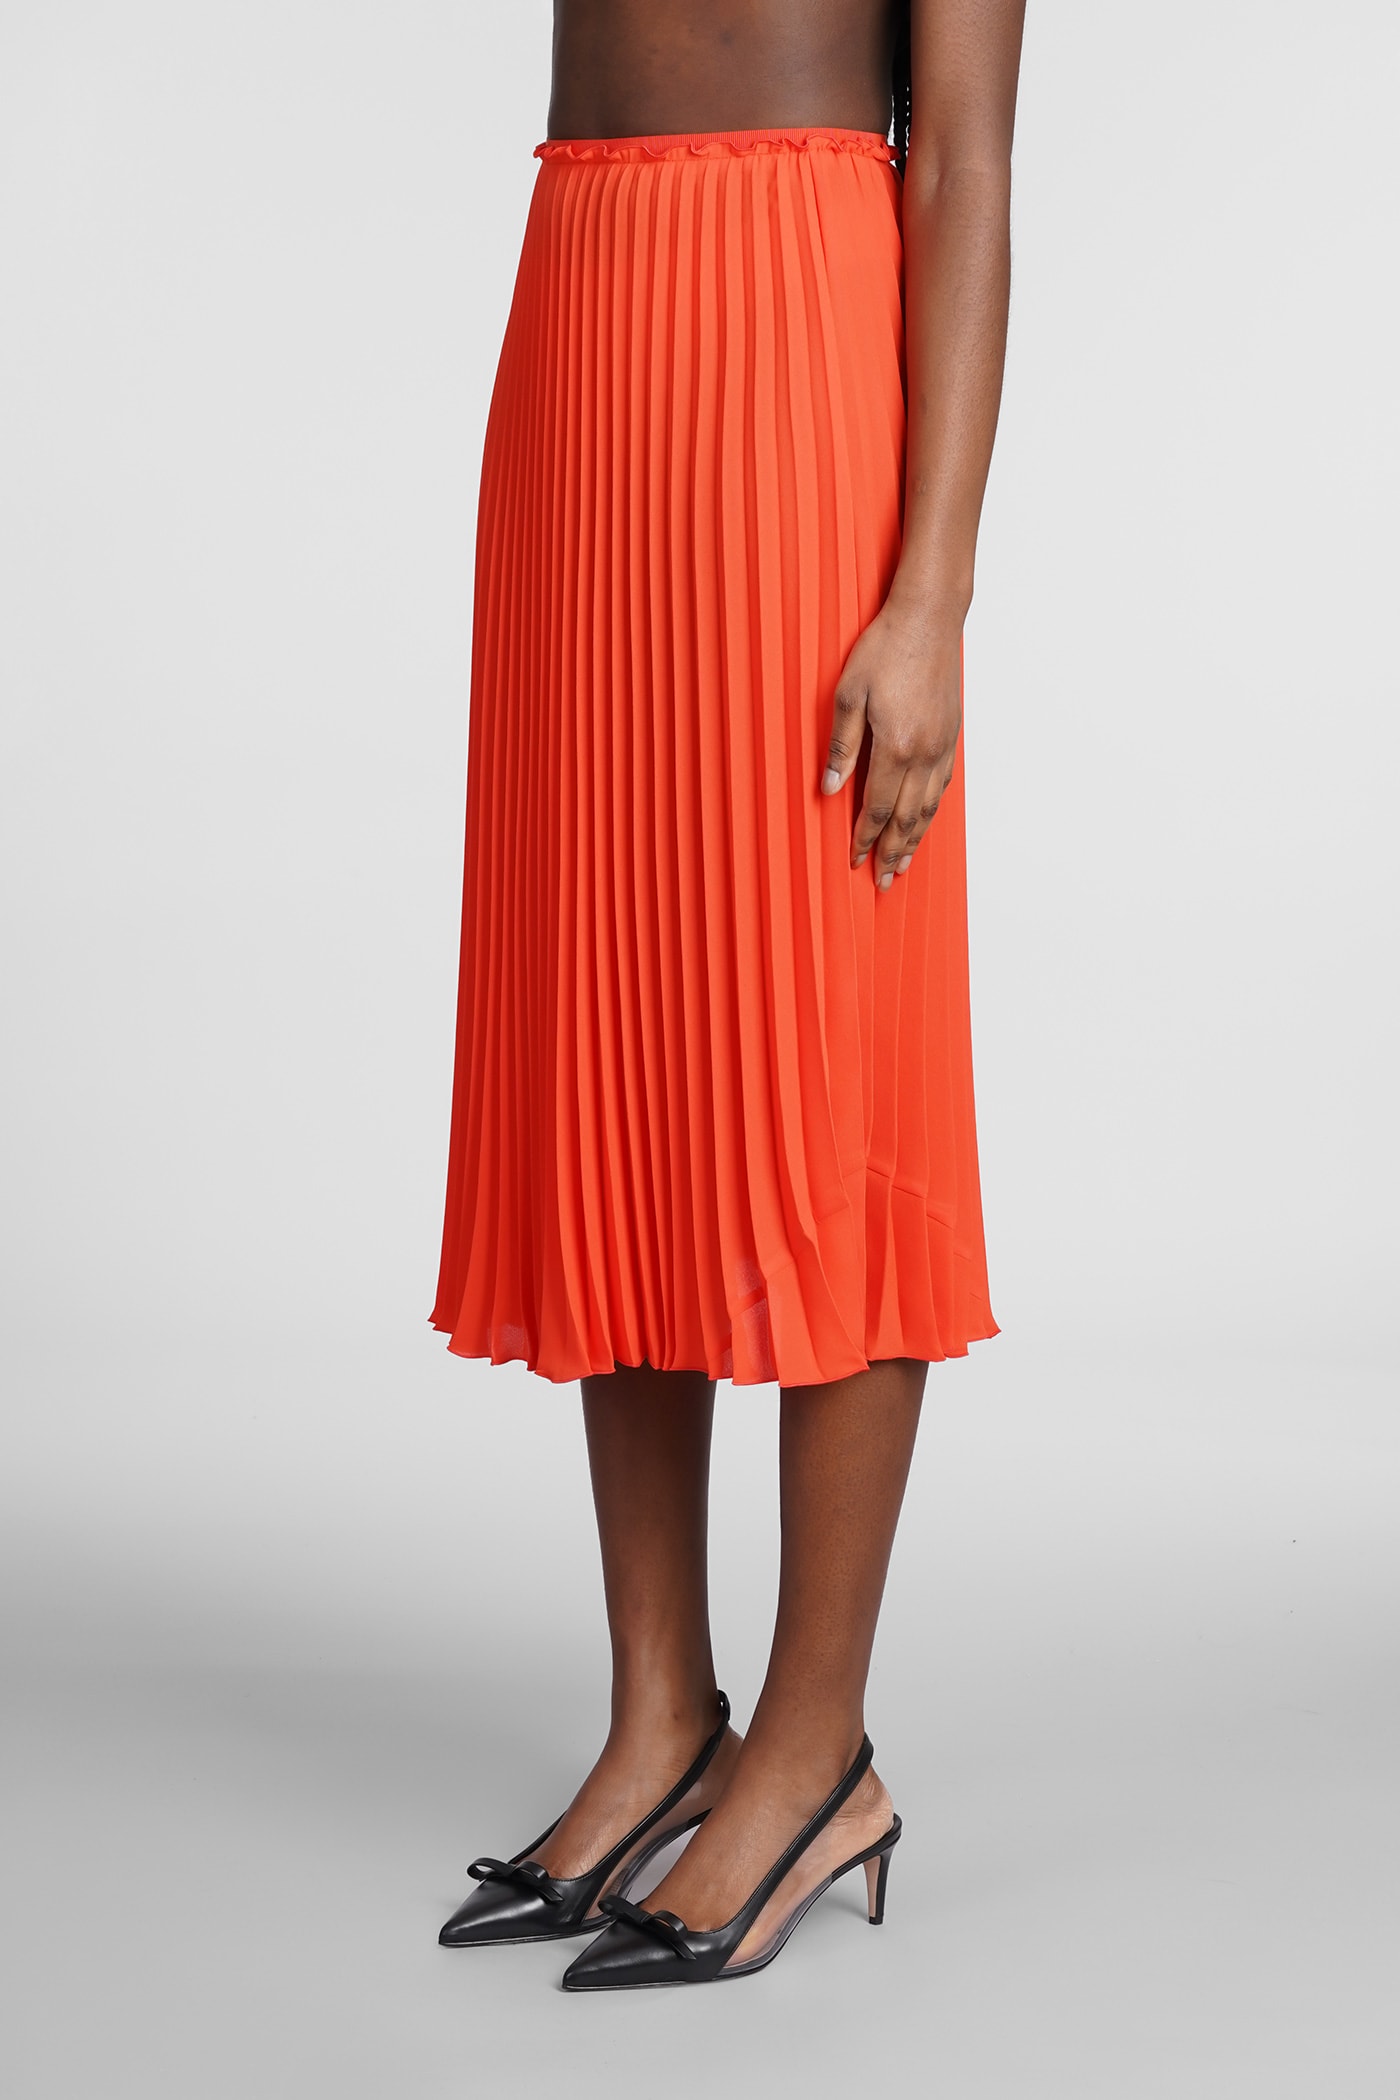 Shop Red Valentino Skirt In Orange Synthetic Fibers